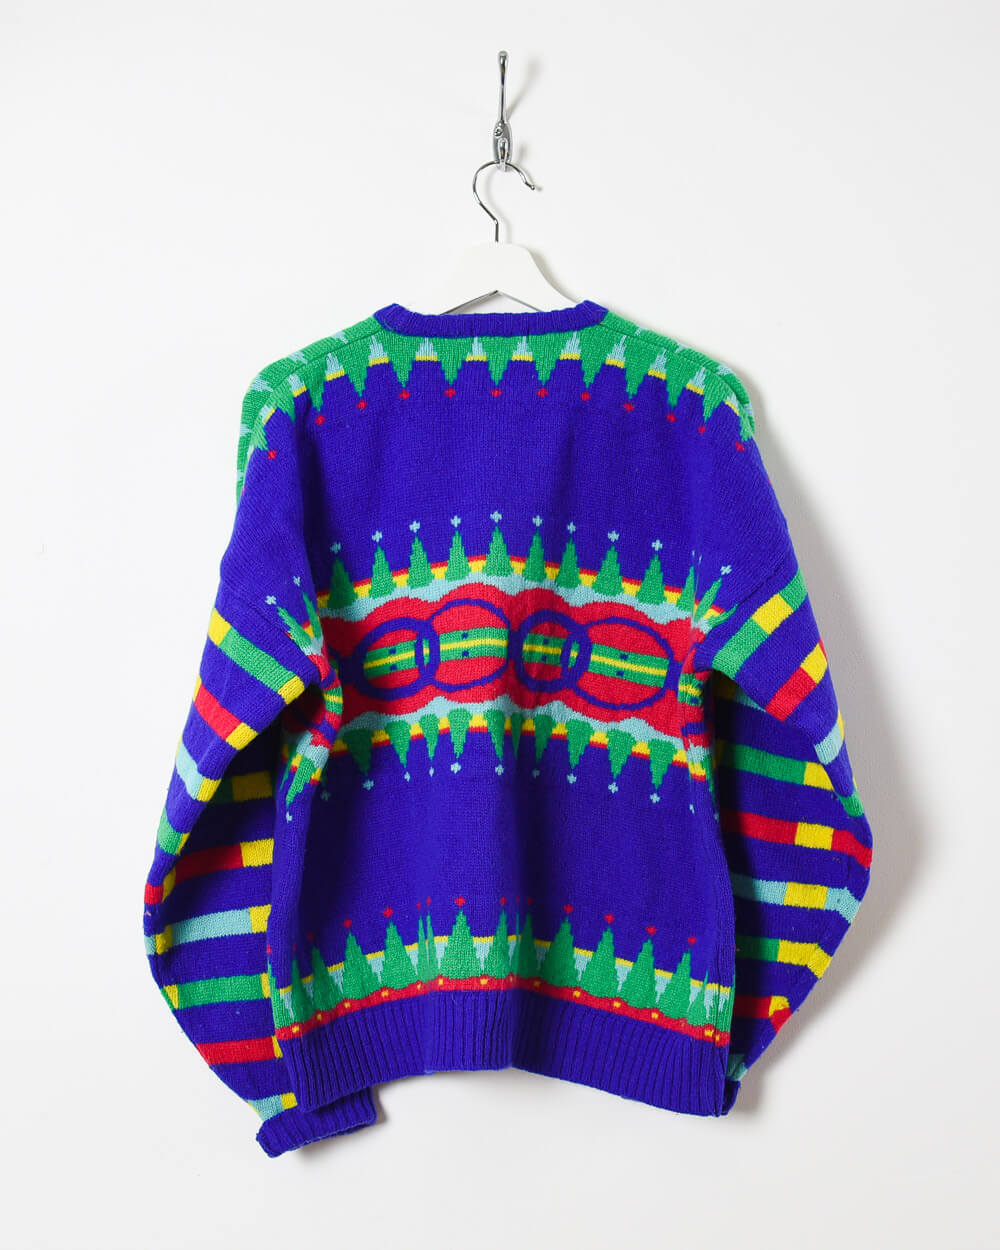 Paco Knitted Sweatshirt - Medium - Domno Vintage 90s, 80s, 00s Retro and Vintage Clothing 